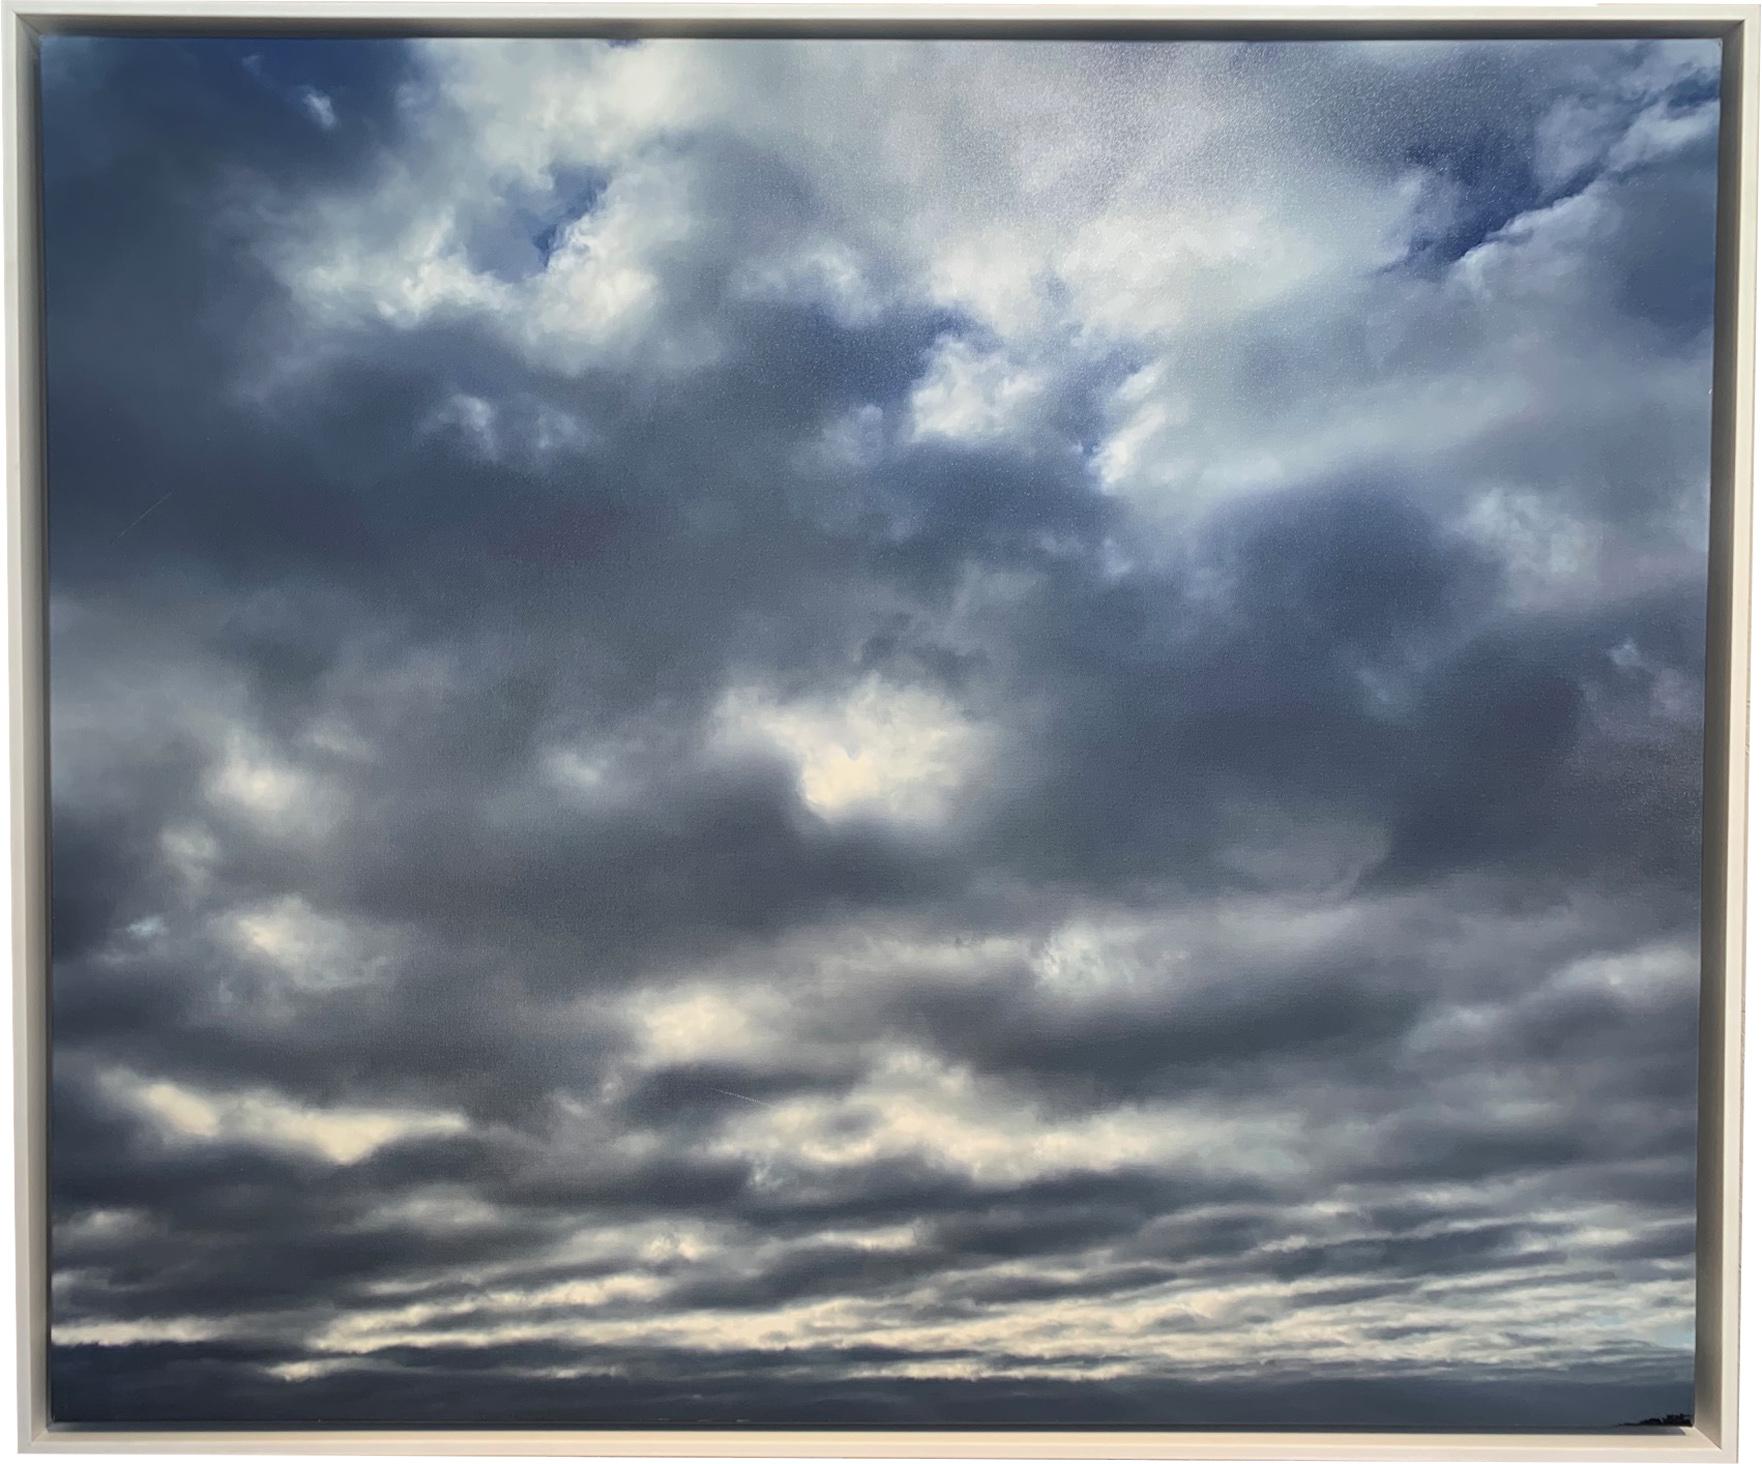 ‘Clouds’ Large Color Photography on Canvas Limited Edition 2/10 - Gray Landscape Photograph by O Devan